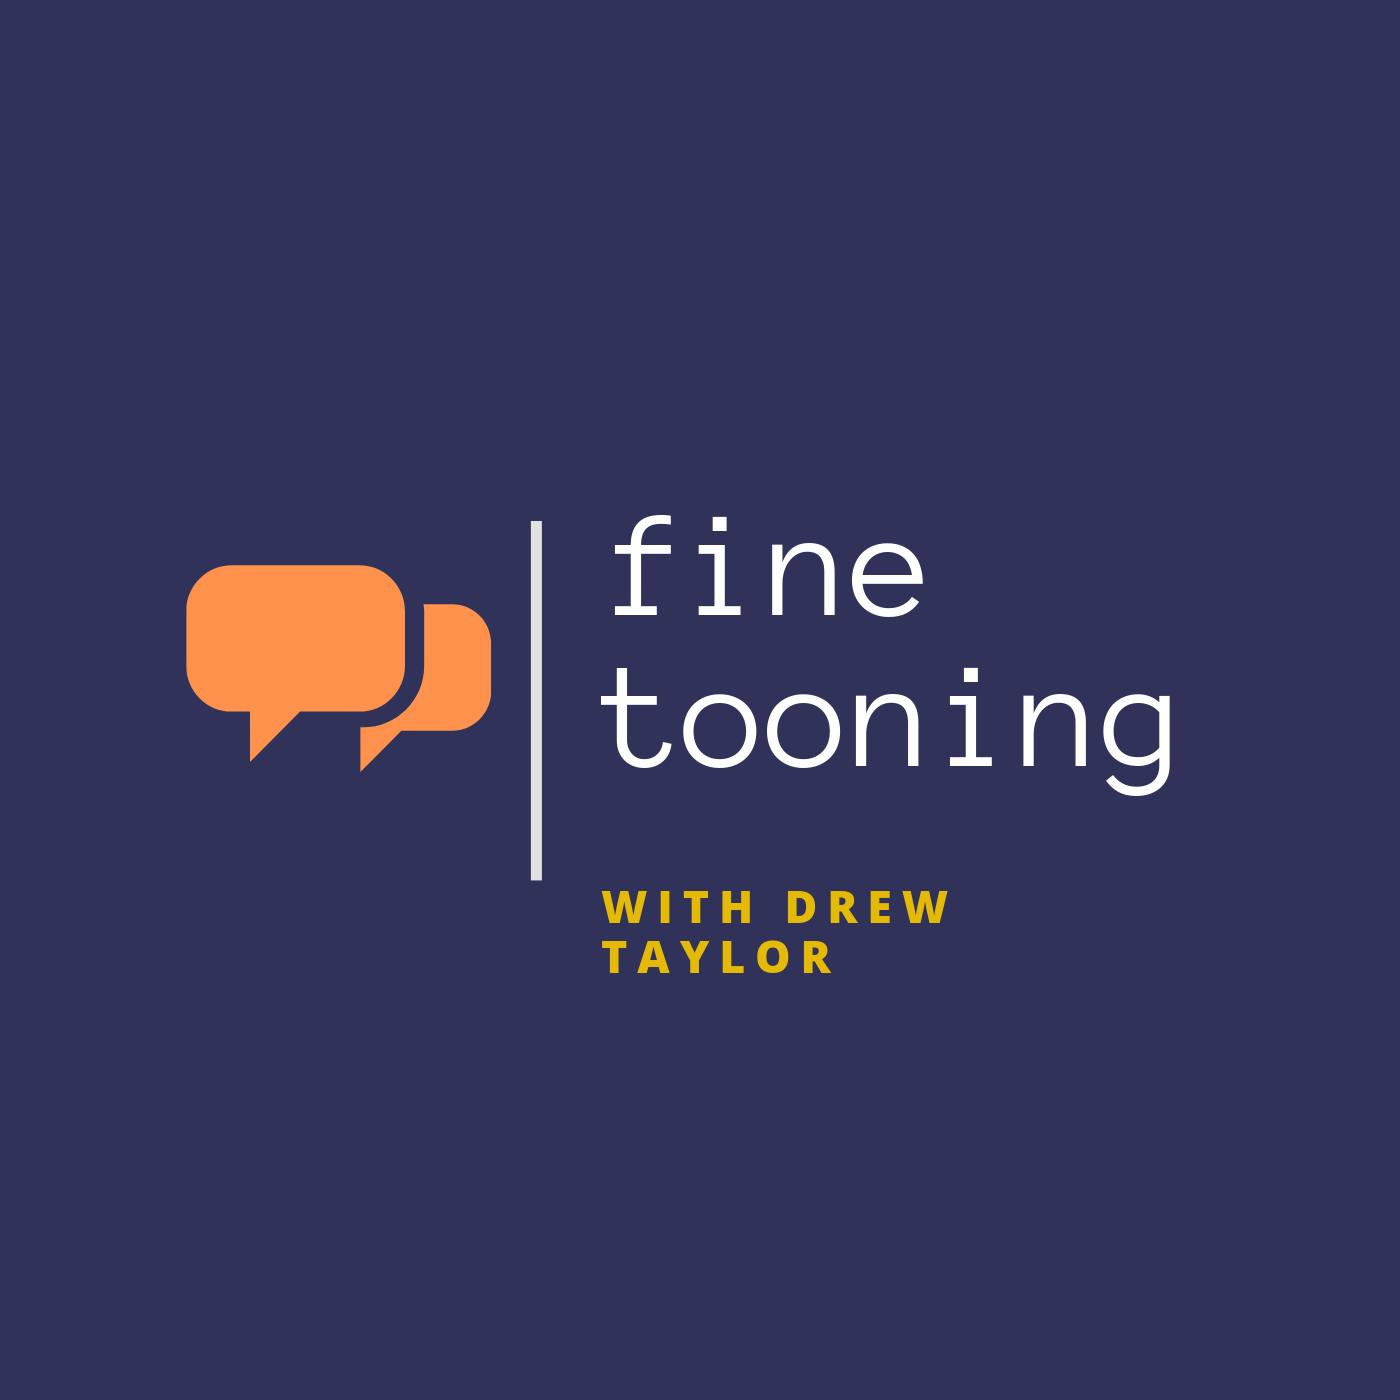 Fine Tooning with Drew Taylor - Episode 168: So what happens now with Disney’s “Aladdin” sequel